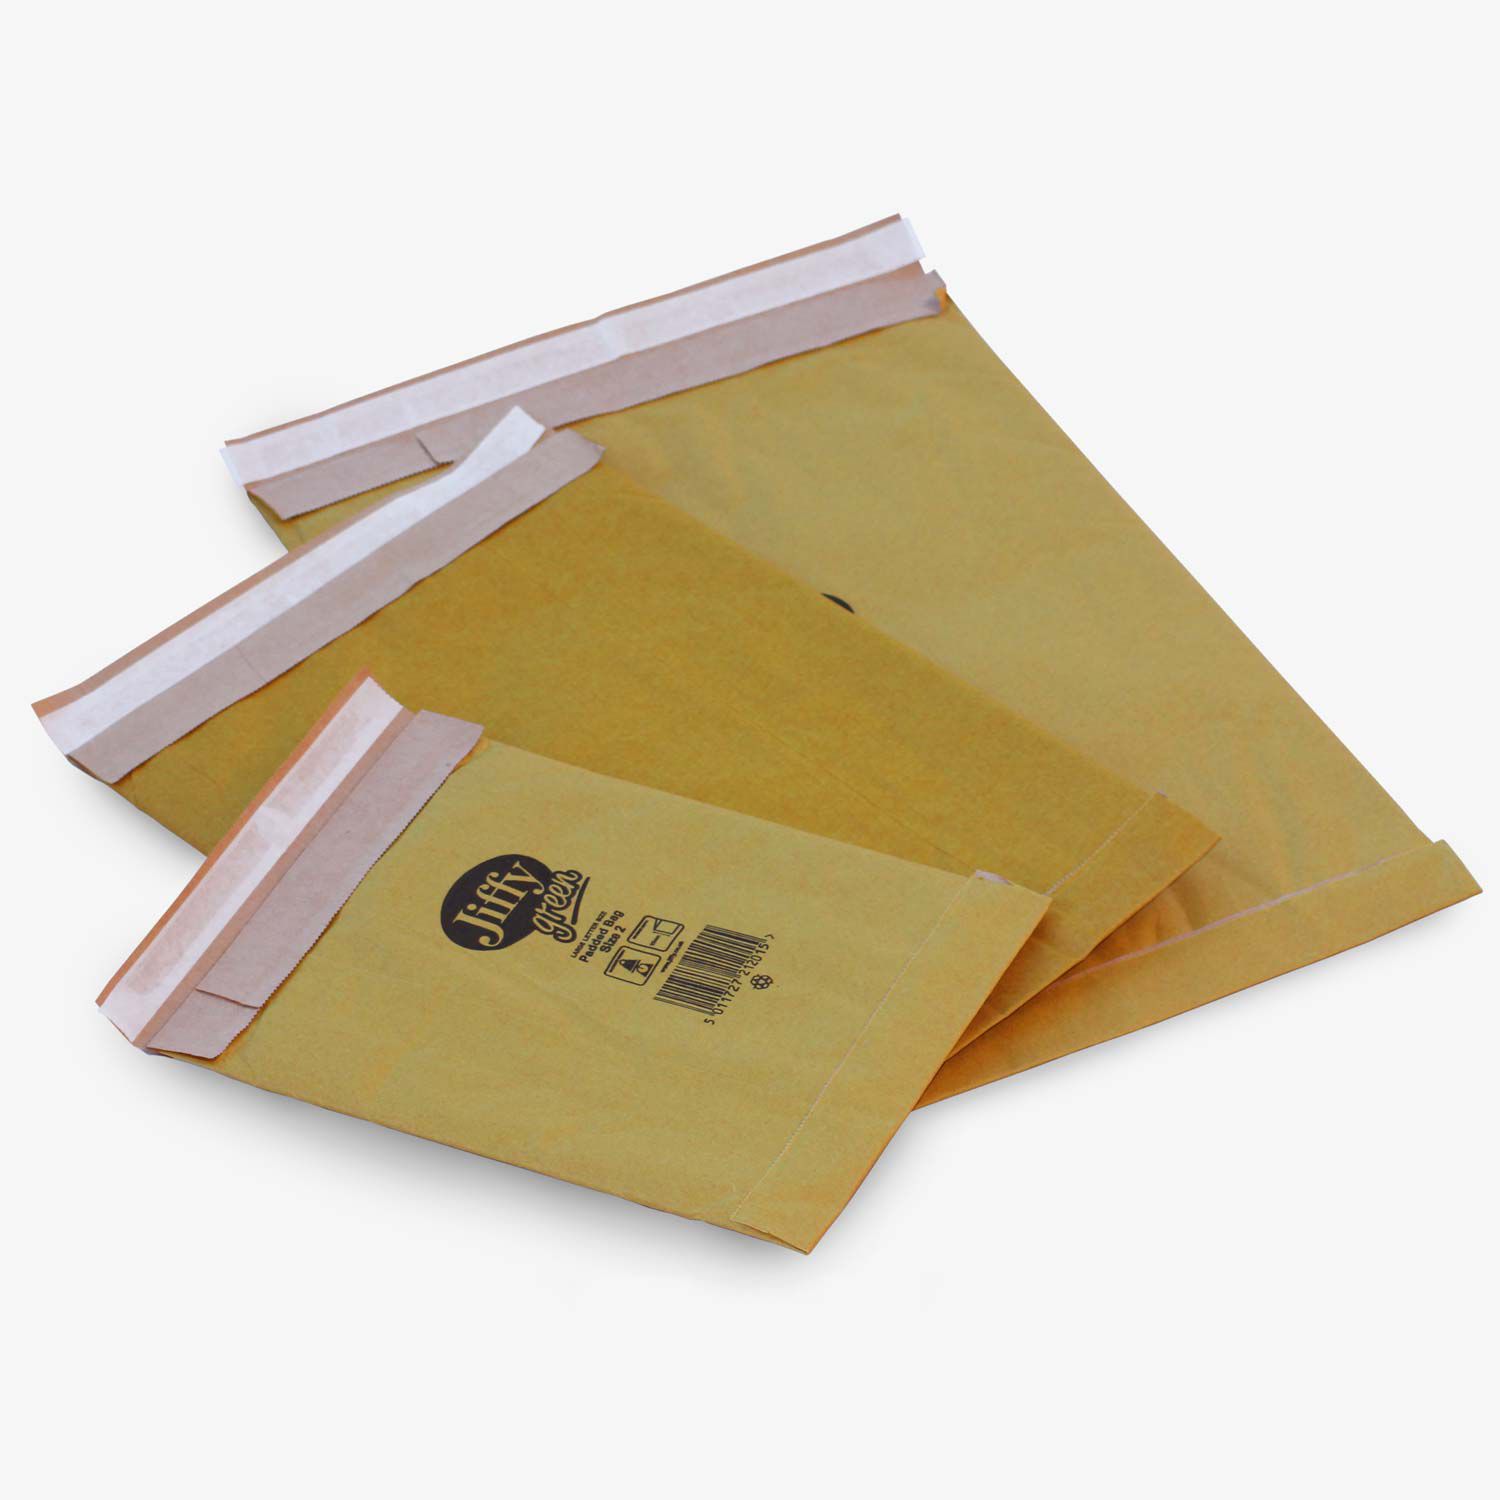 Jiffy® bags with bubble lining for packing ecommerce orders